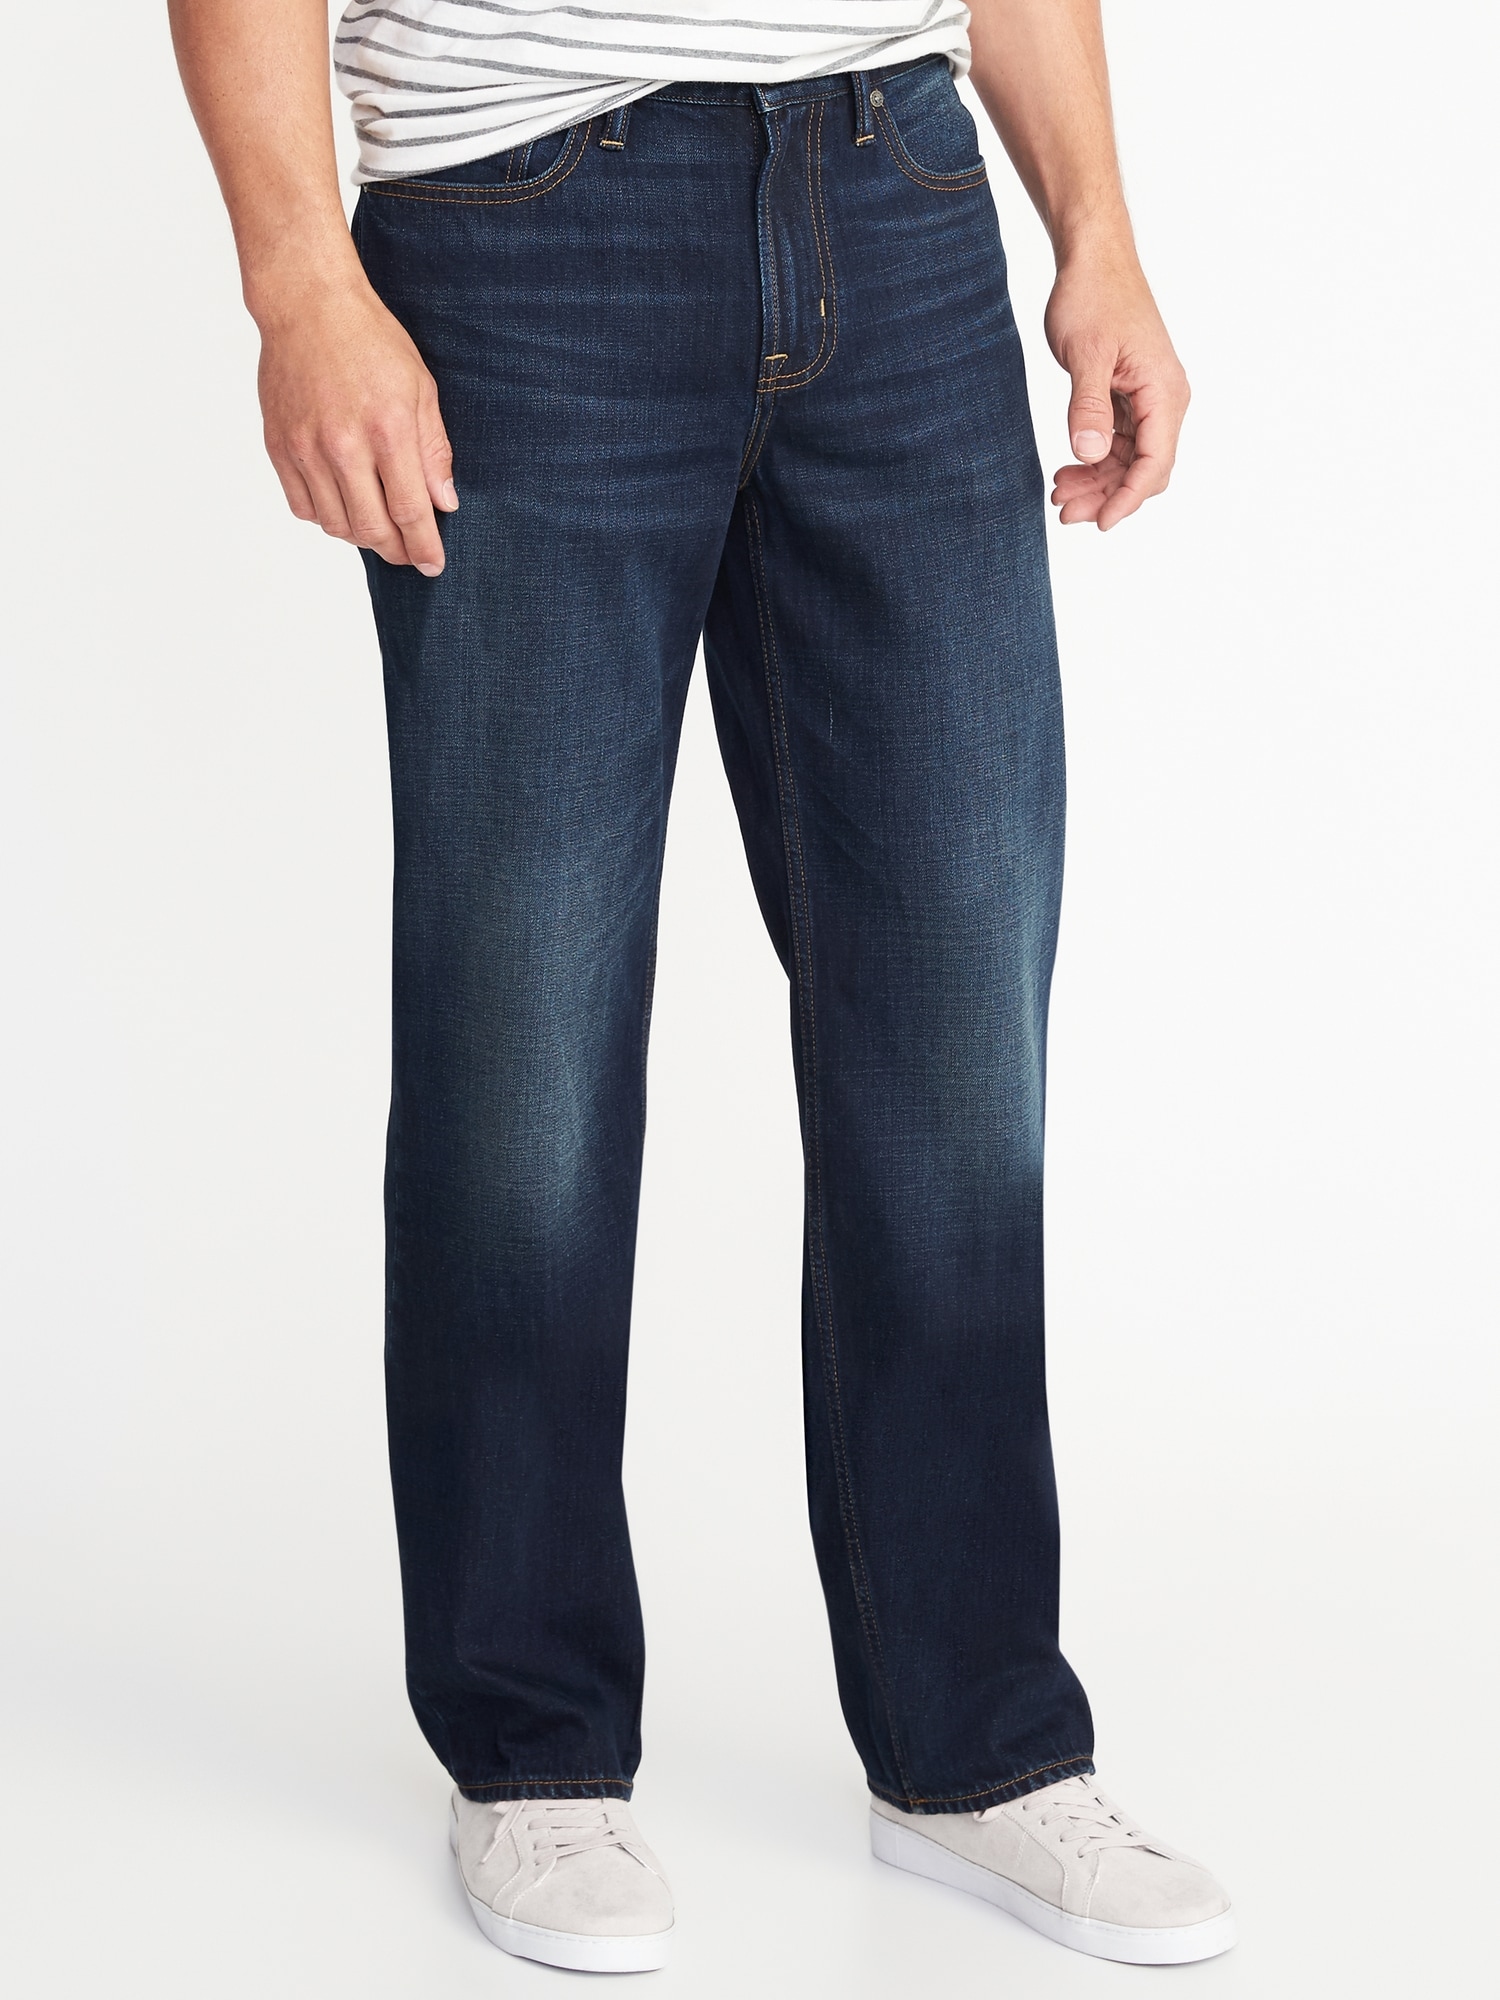 old navy mens loose fit jeans